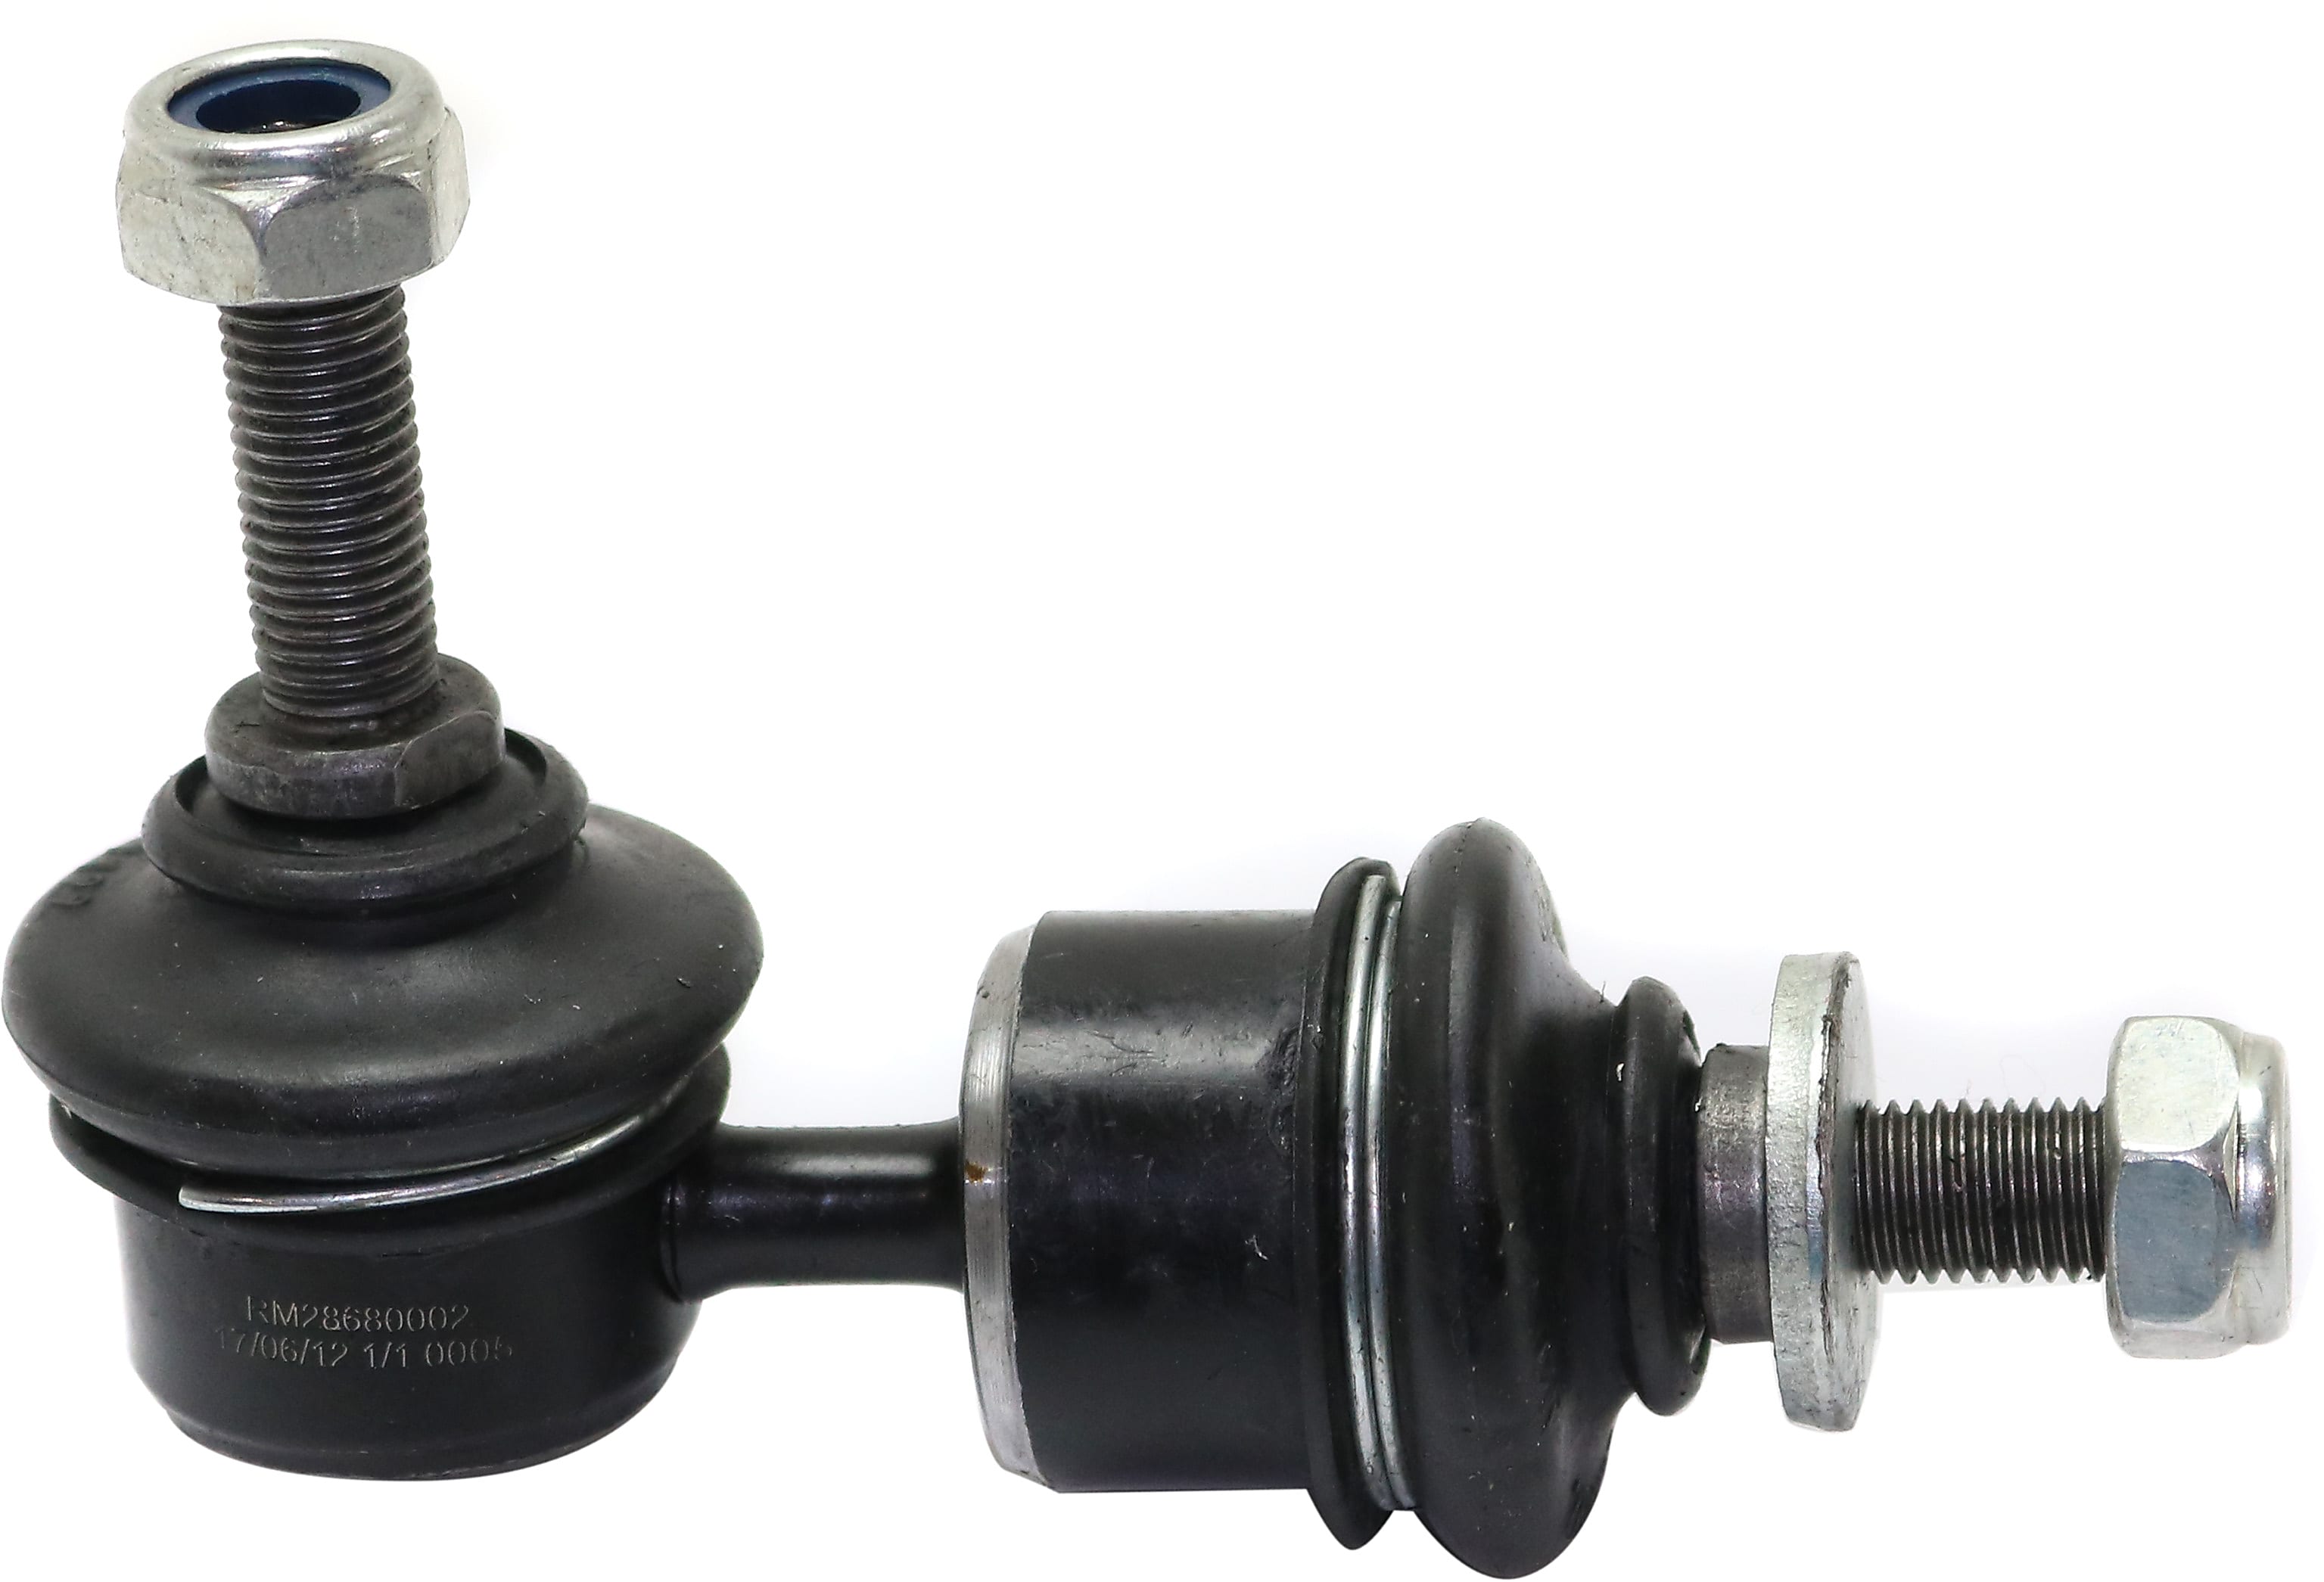 4 FRONT REAR SWAY BAR LINKS FOR MAZDA 5 06-10